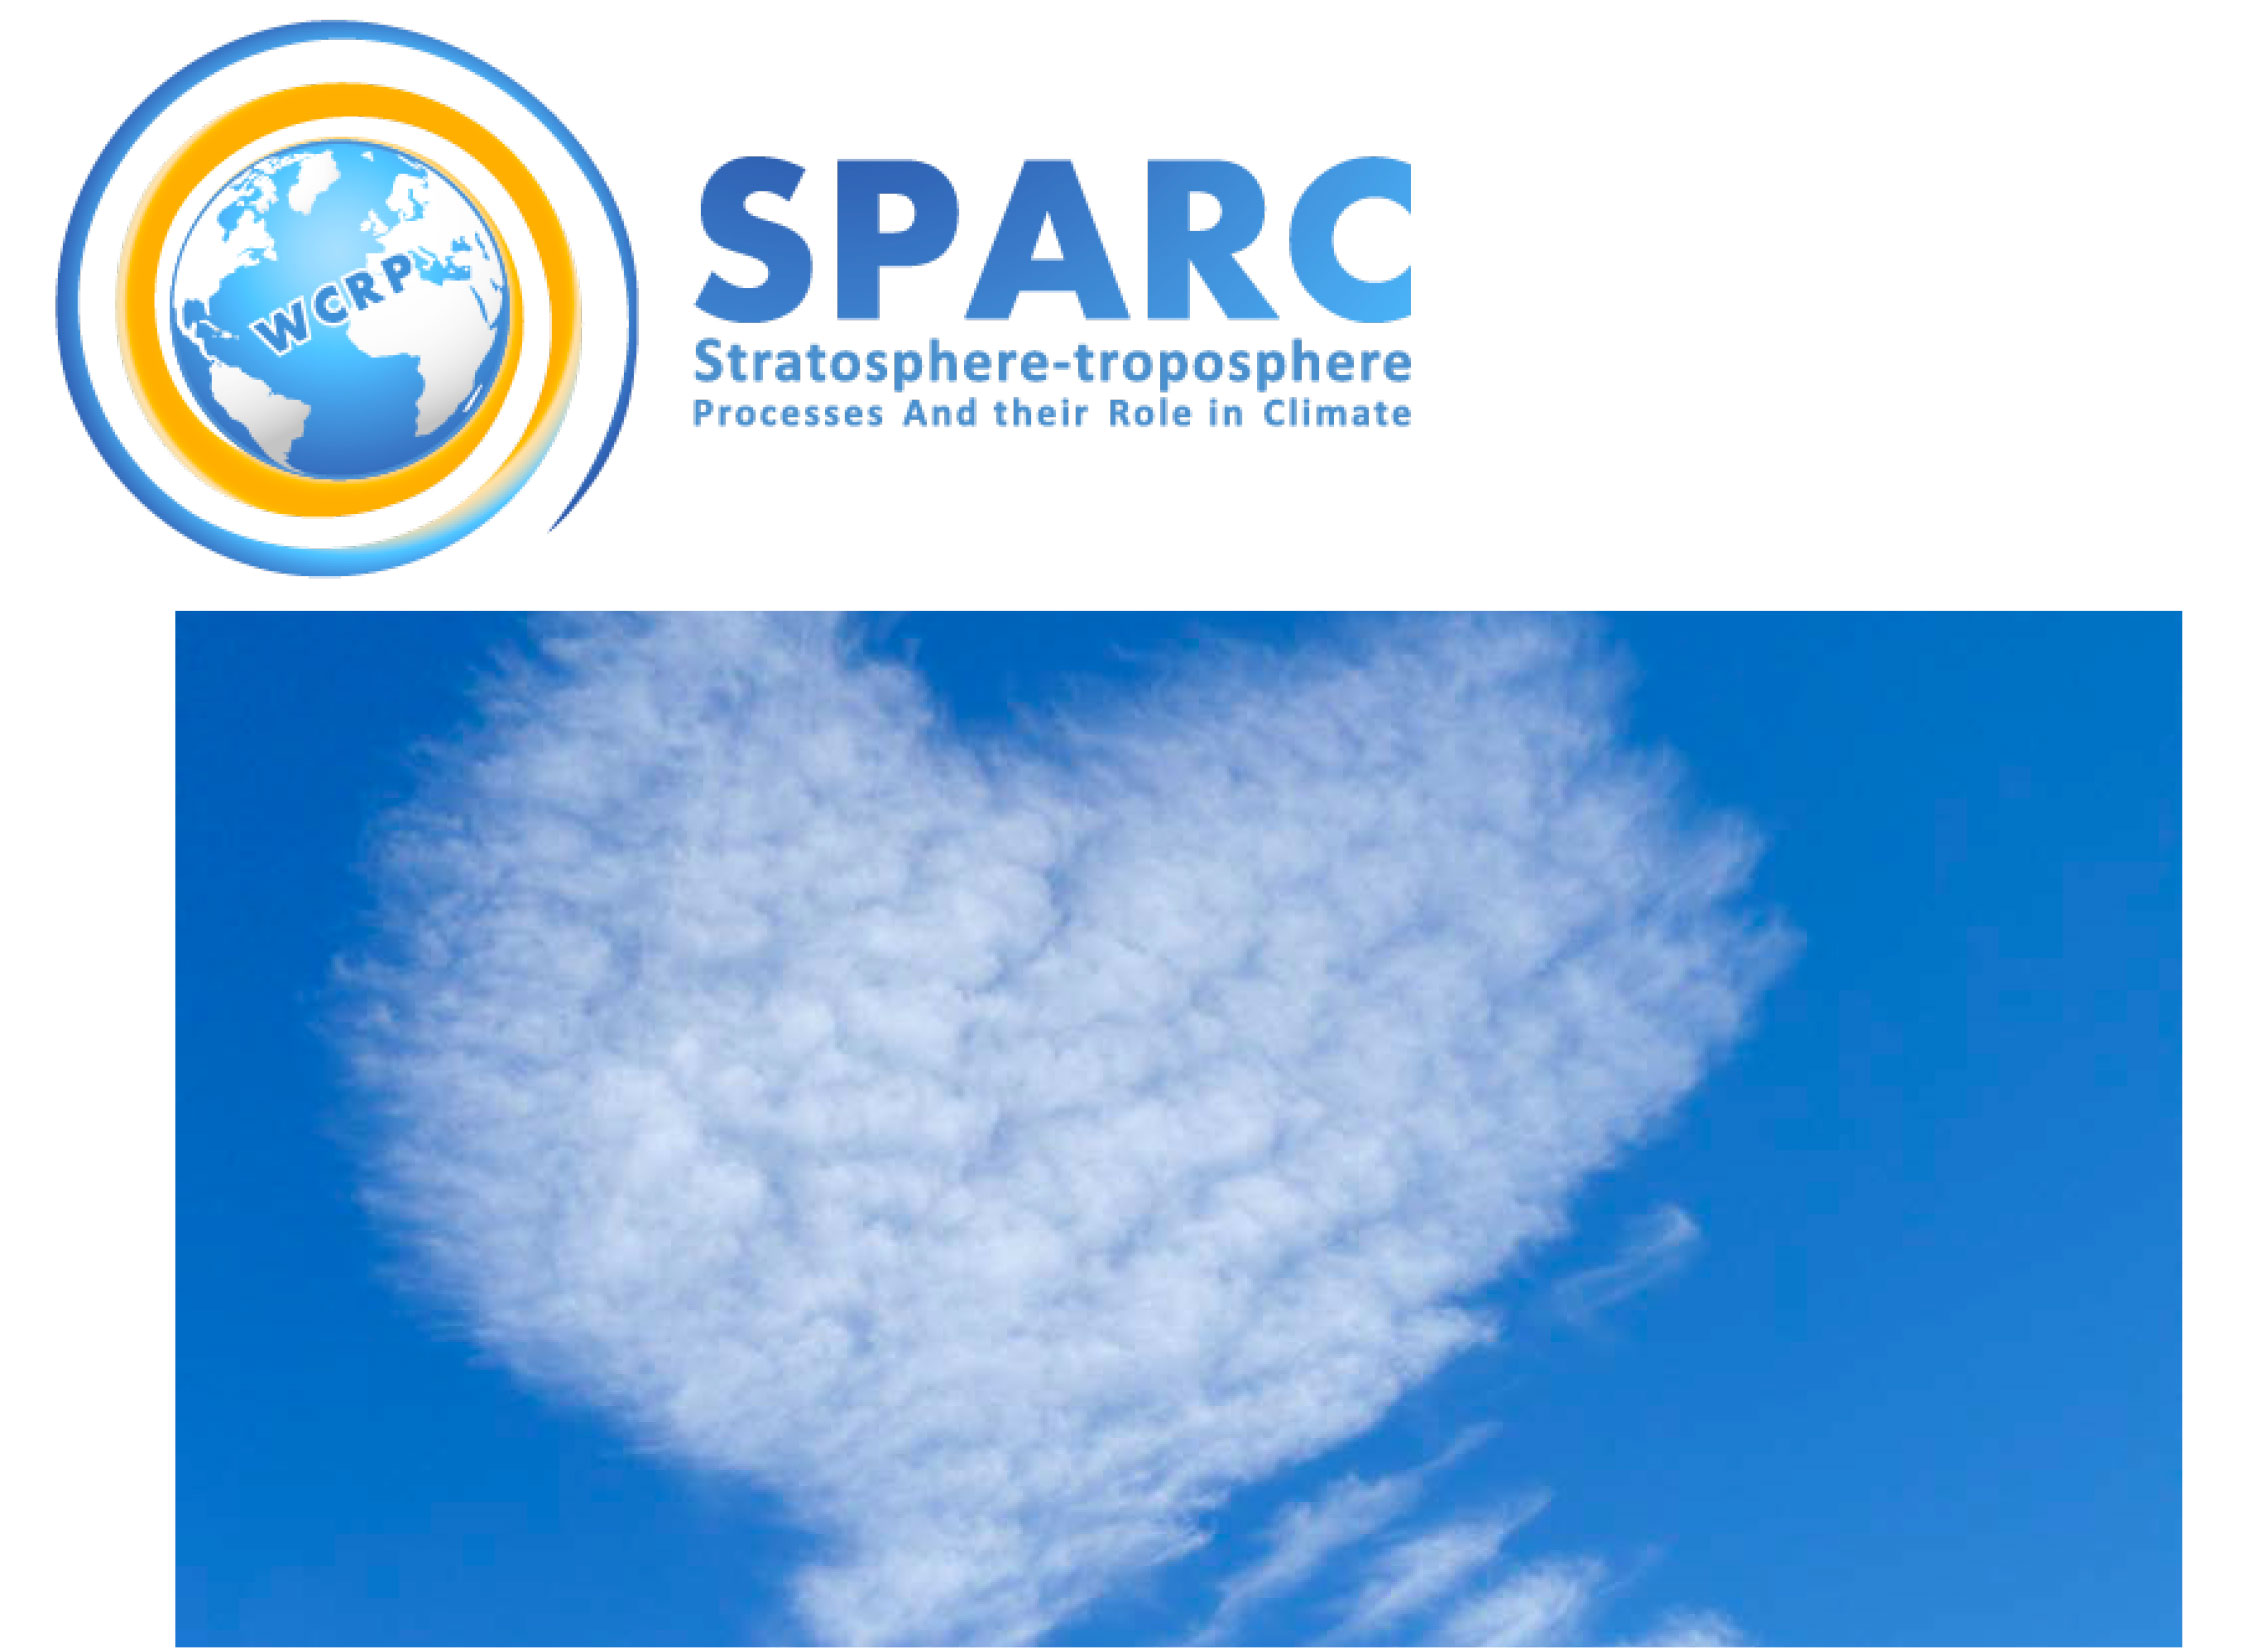 Stratosphere-troposphere Processes And their Role in Climate SPARC